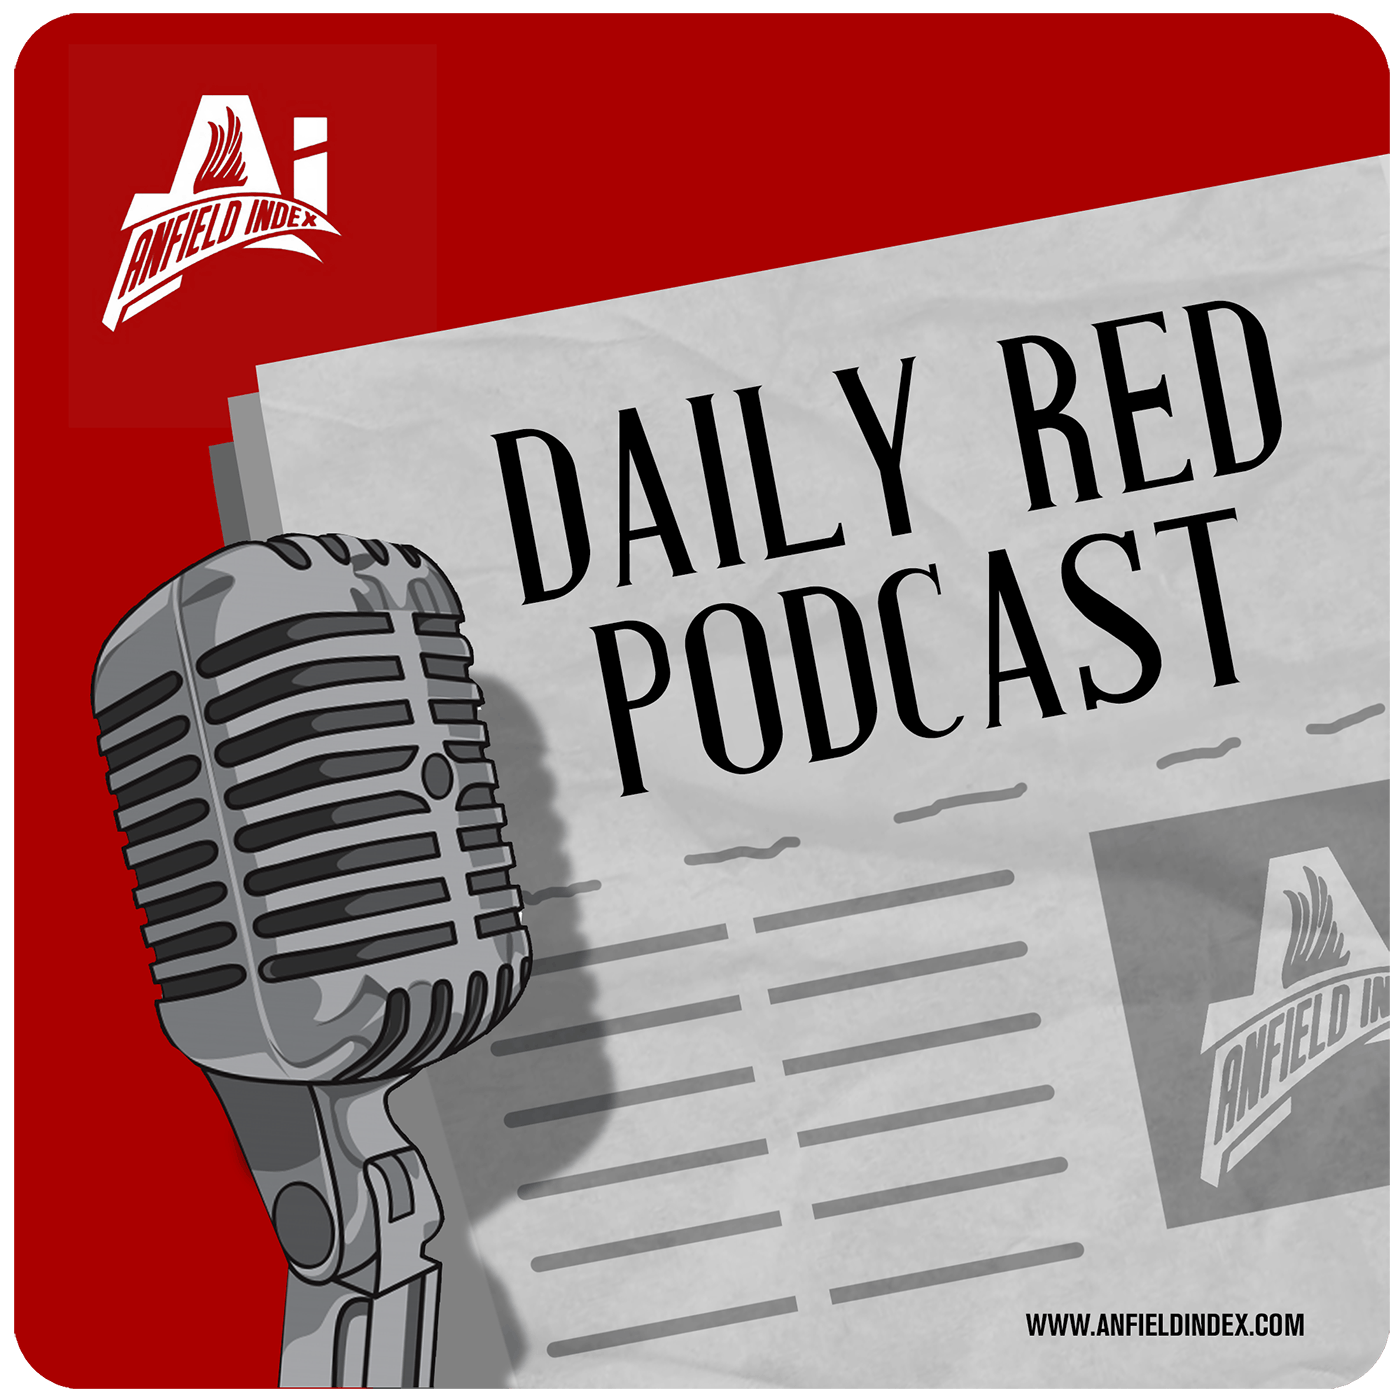 No Game Weekend - Daily Red Podcast